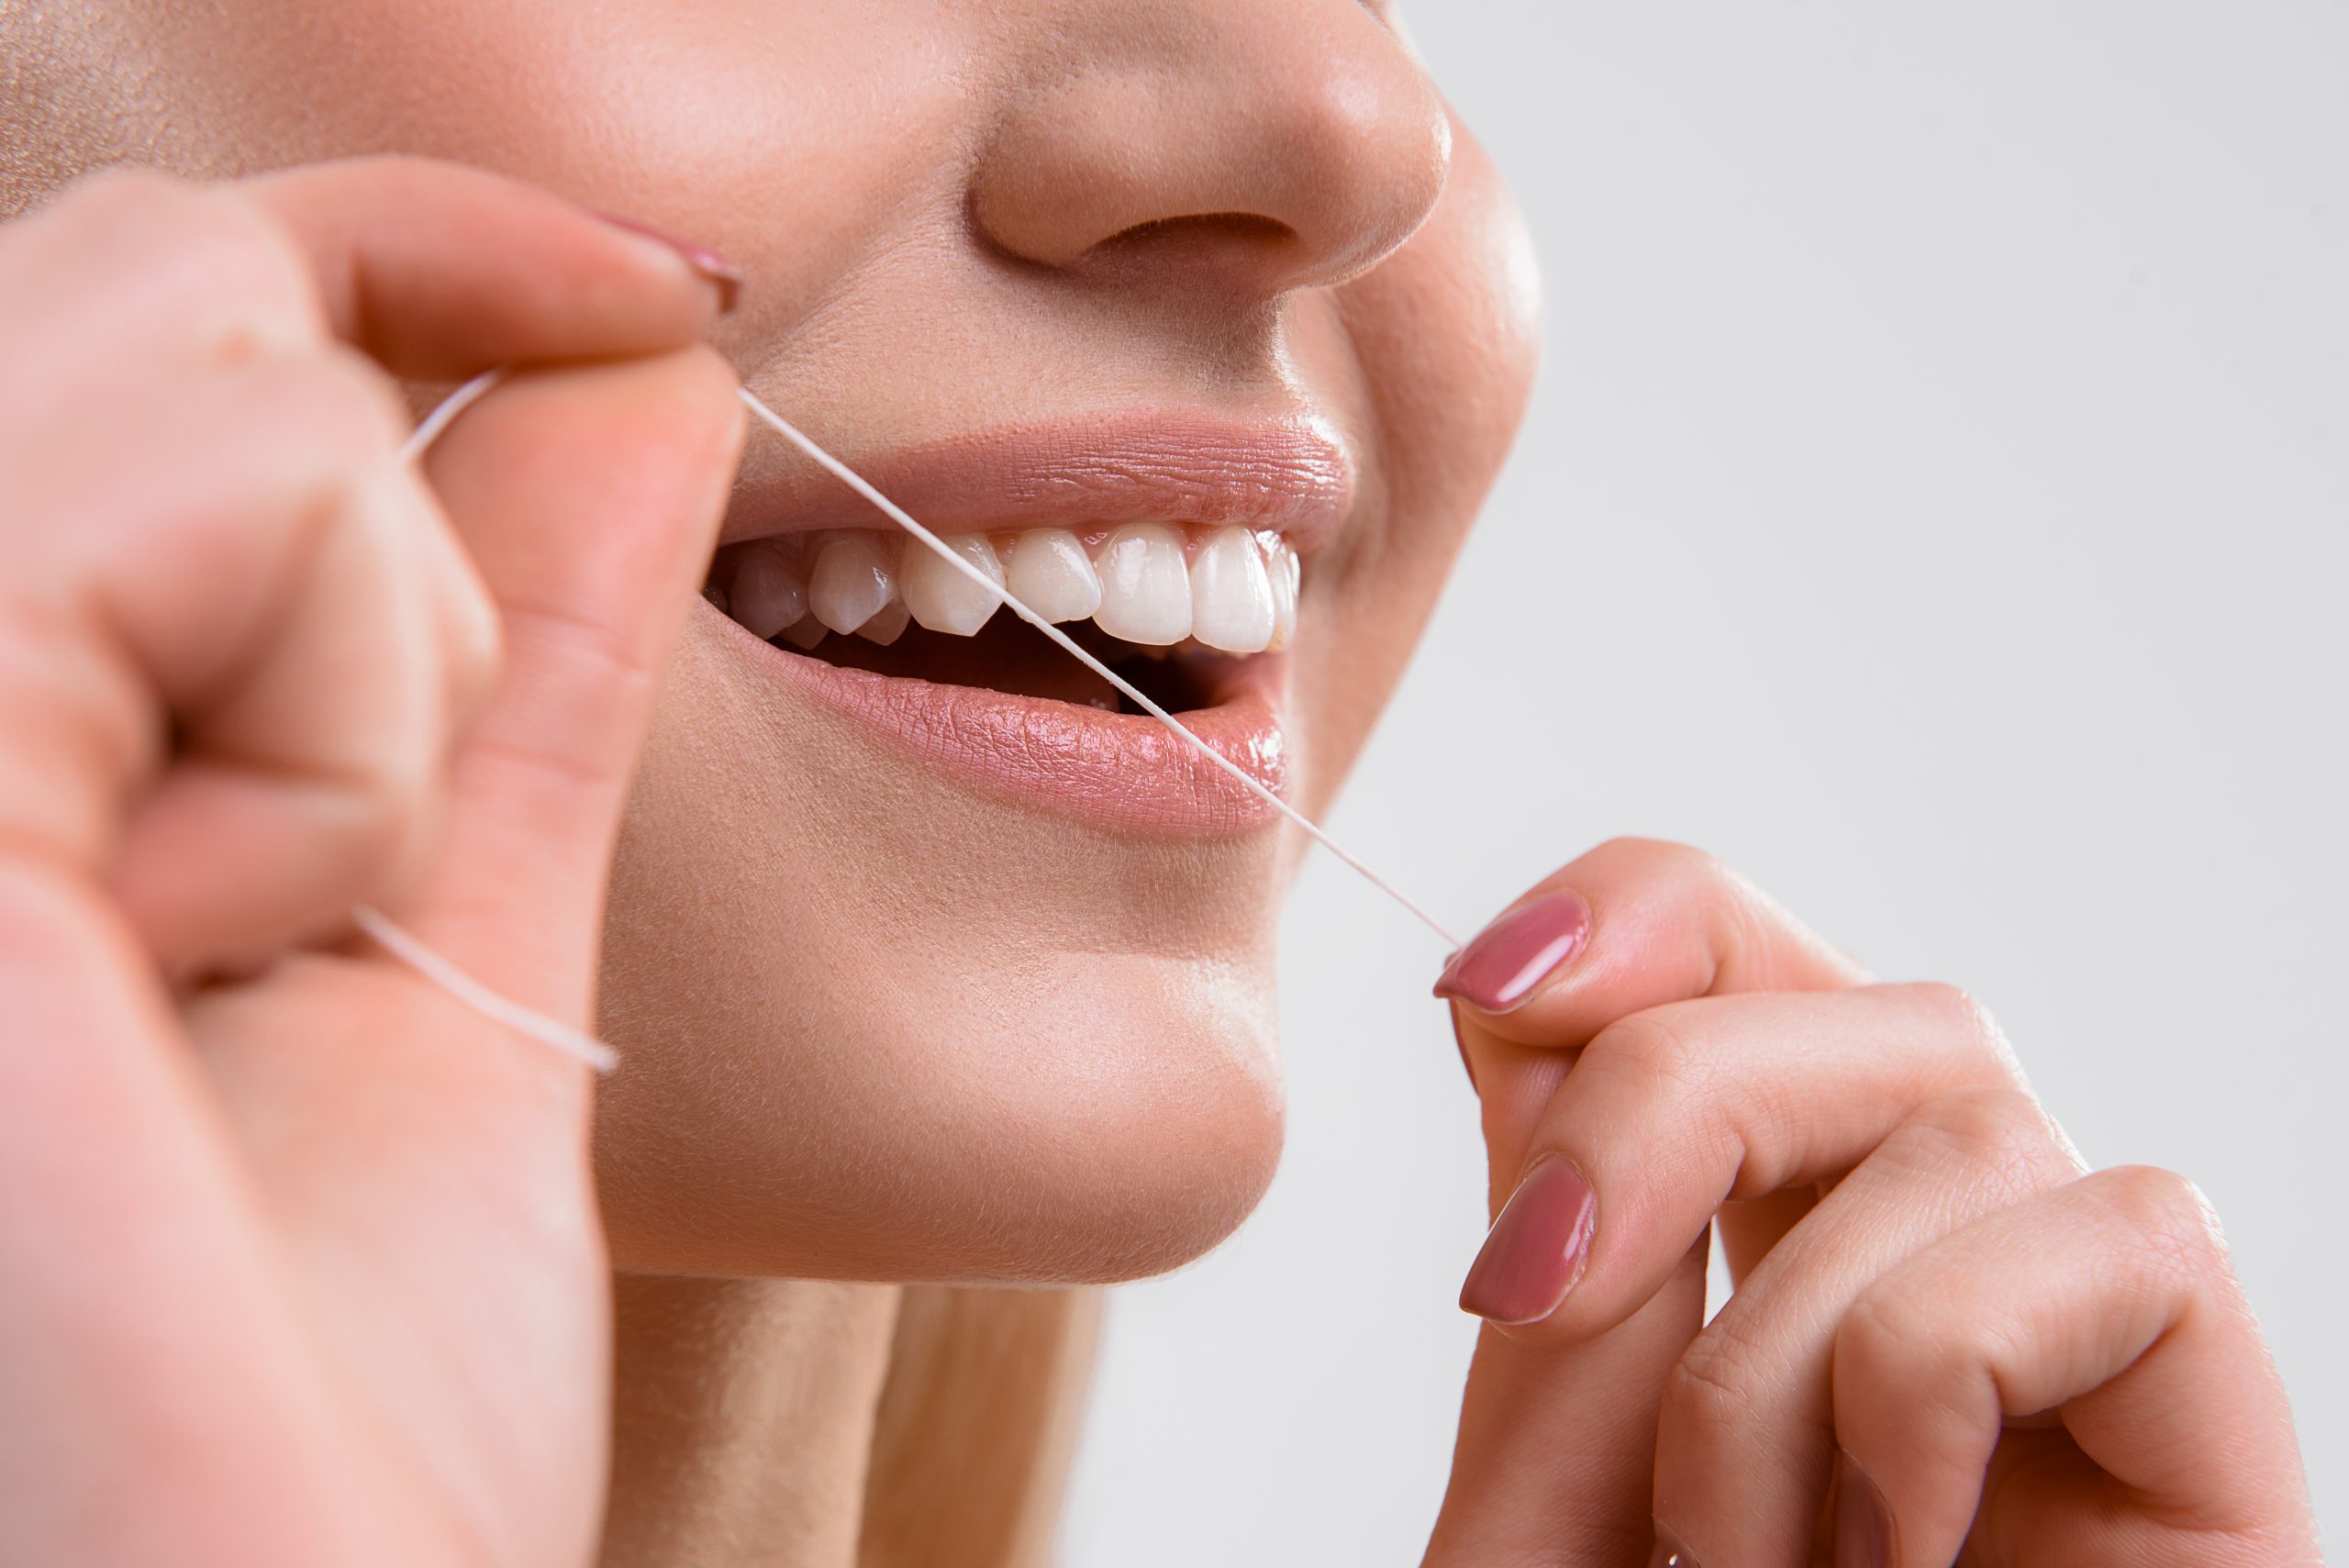 The benefits of flossing for dental health